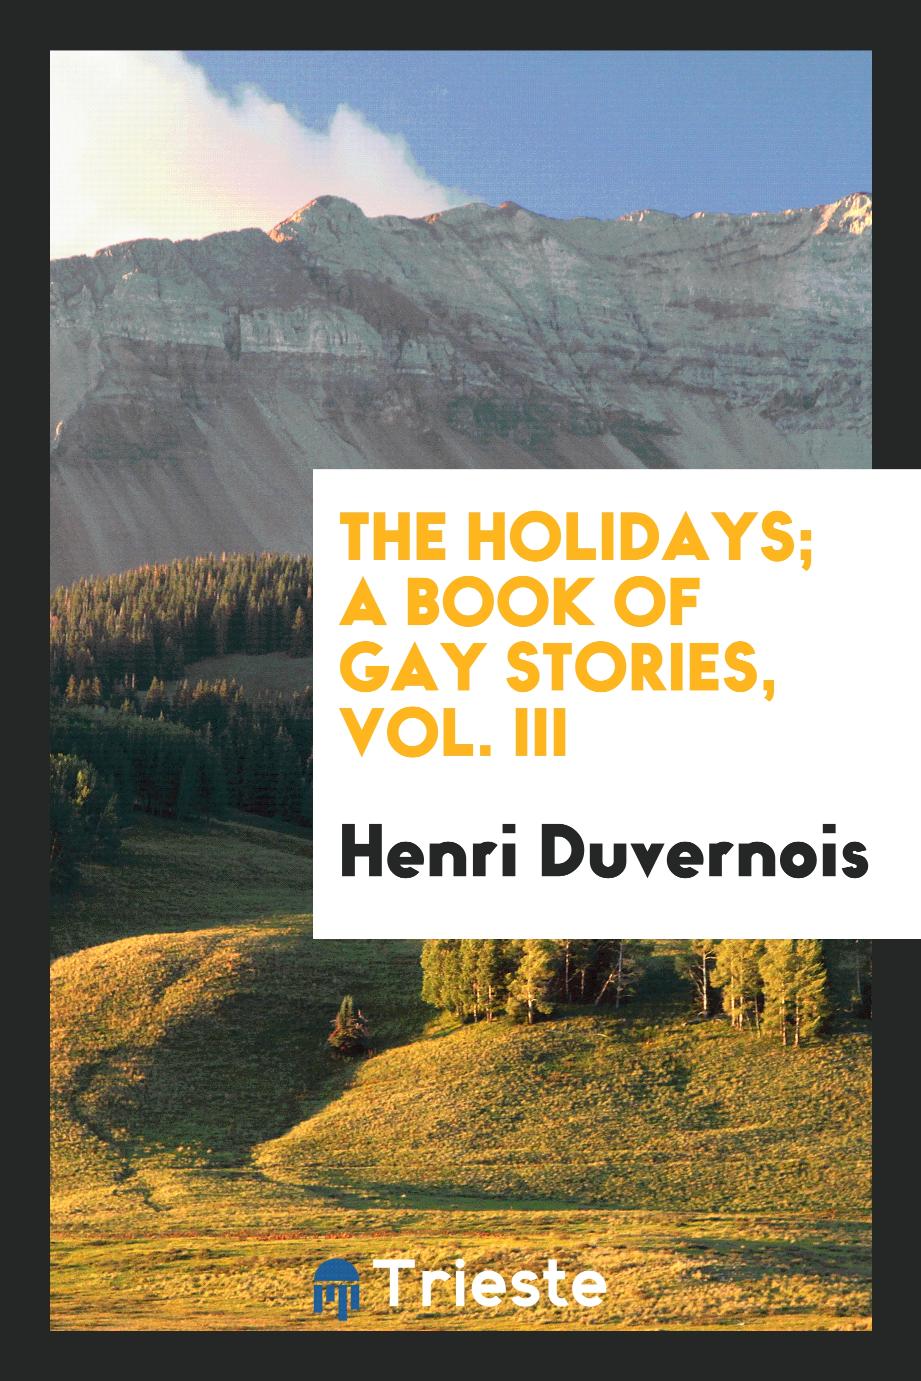 The holidays; a book of gay stories, Vol. III